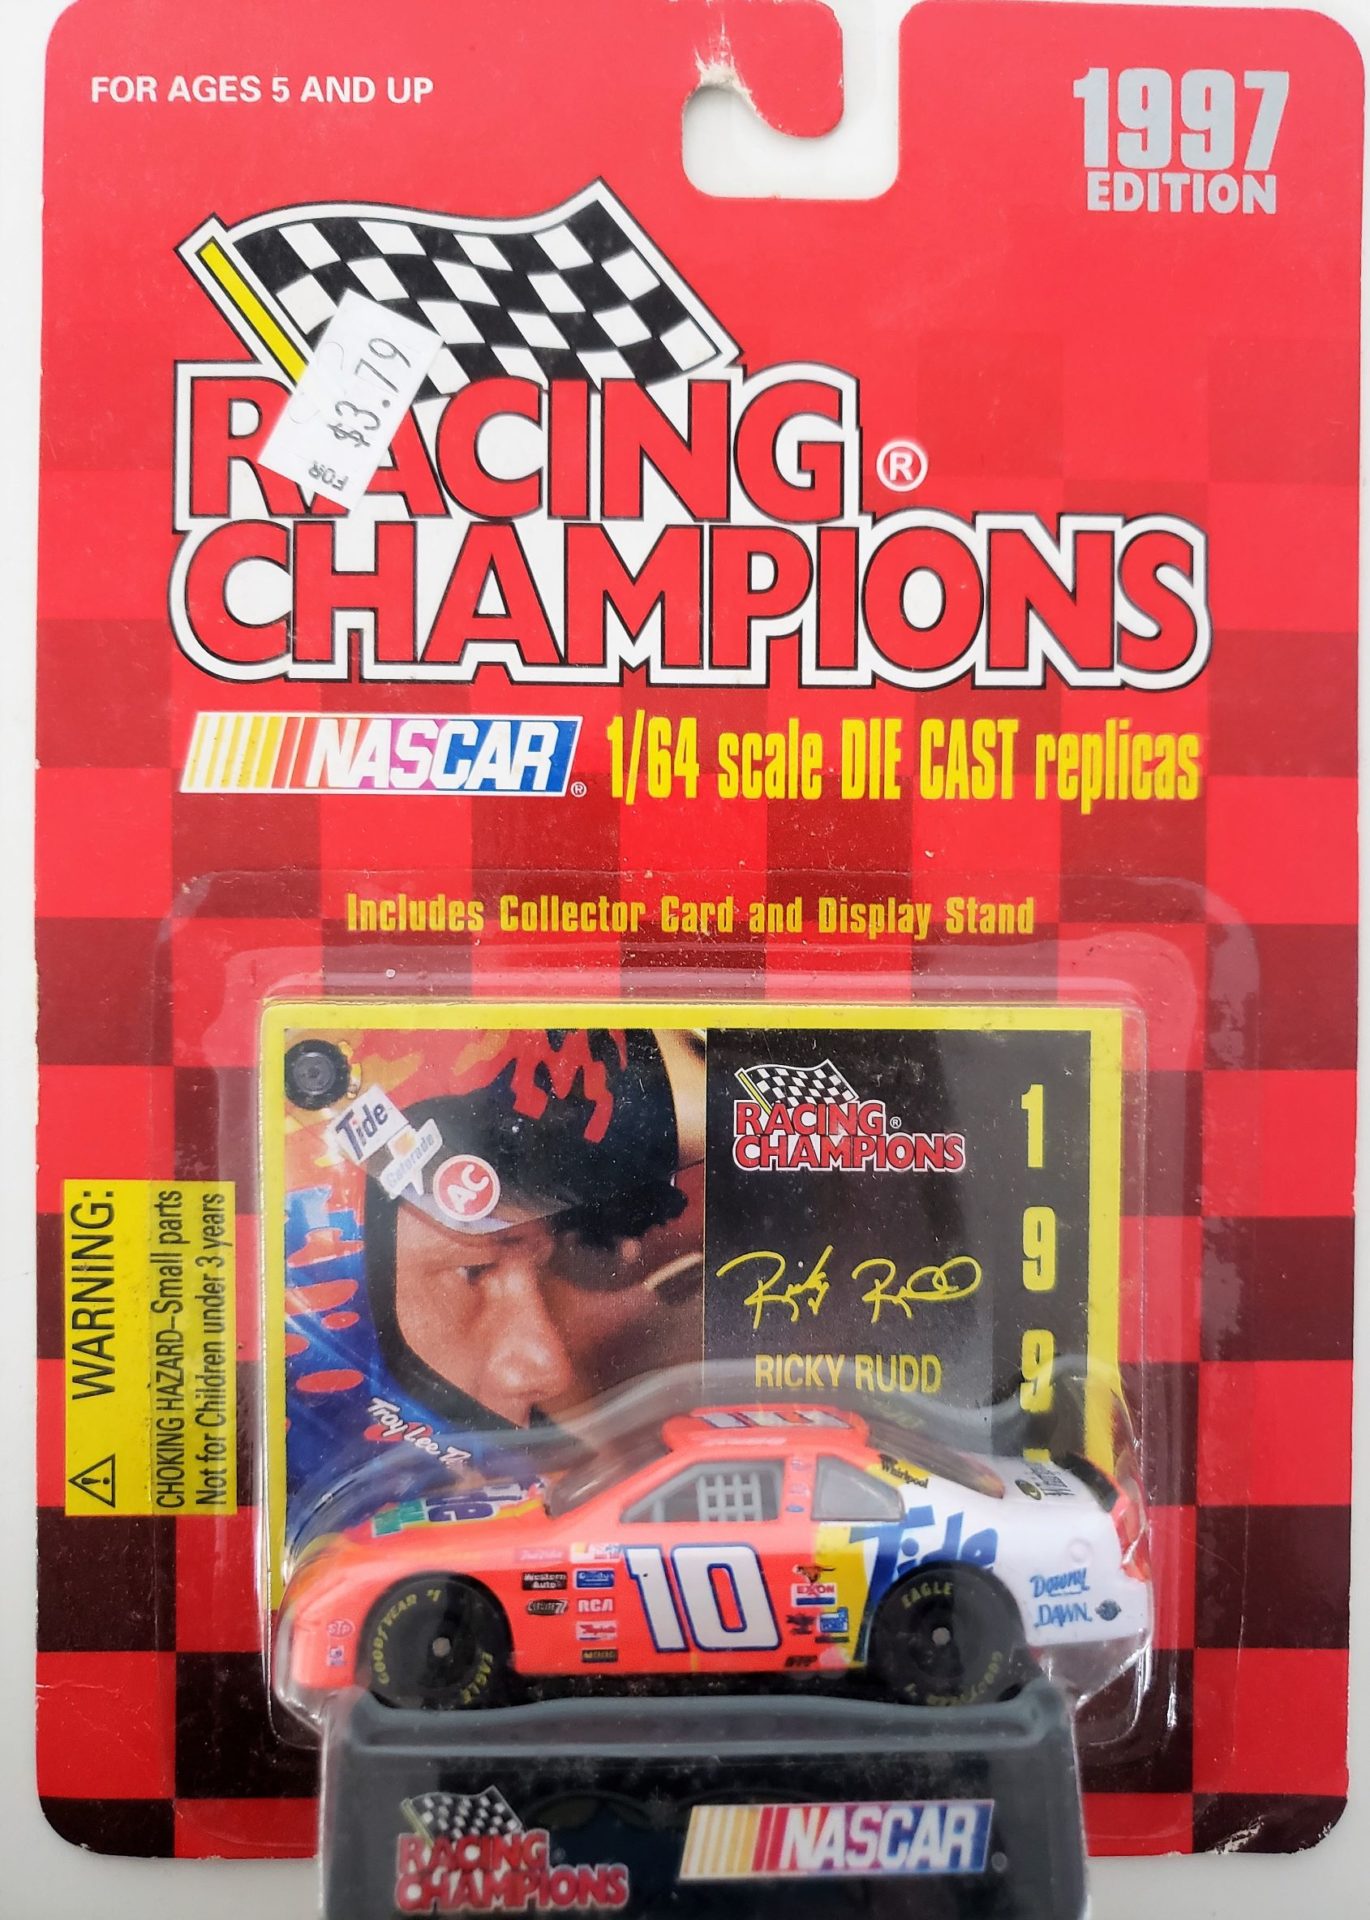 Bobby Hamilton 1999 4 1:64 Scale Die Cast Replica Collector Car With Metallic Finish Racing Champions Under The Lights NASCAR No 